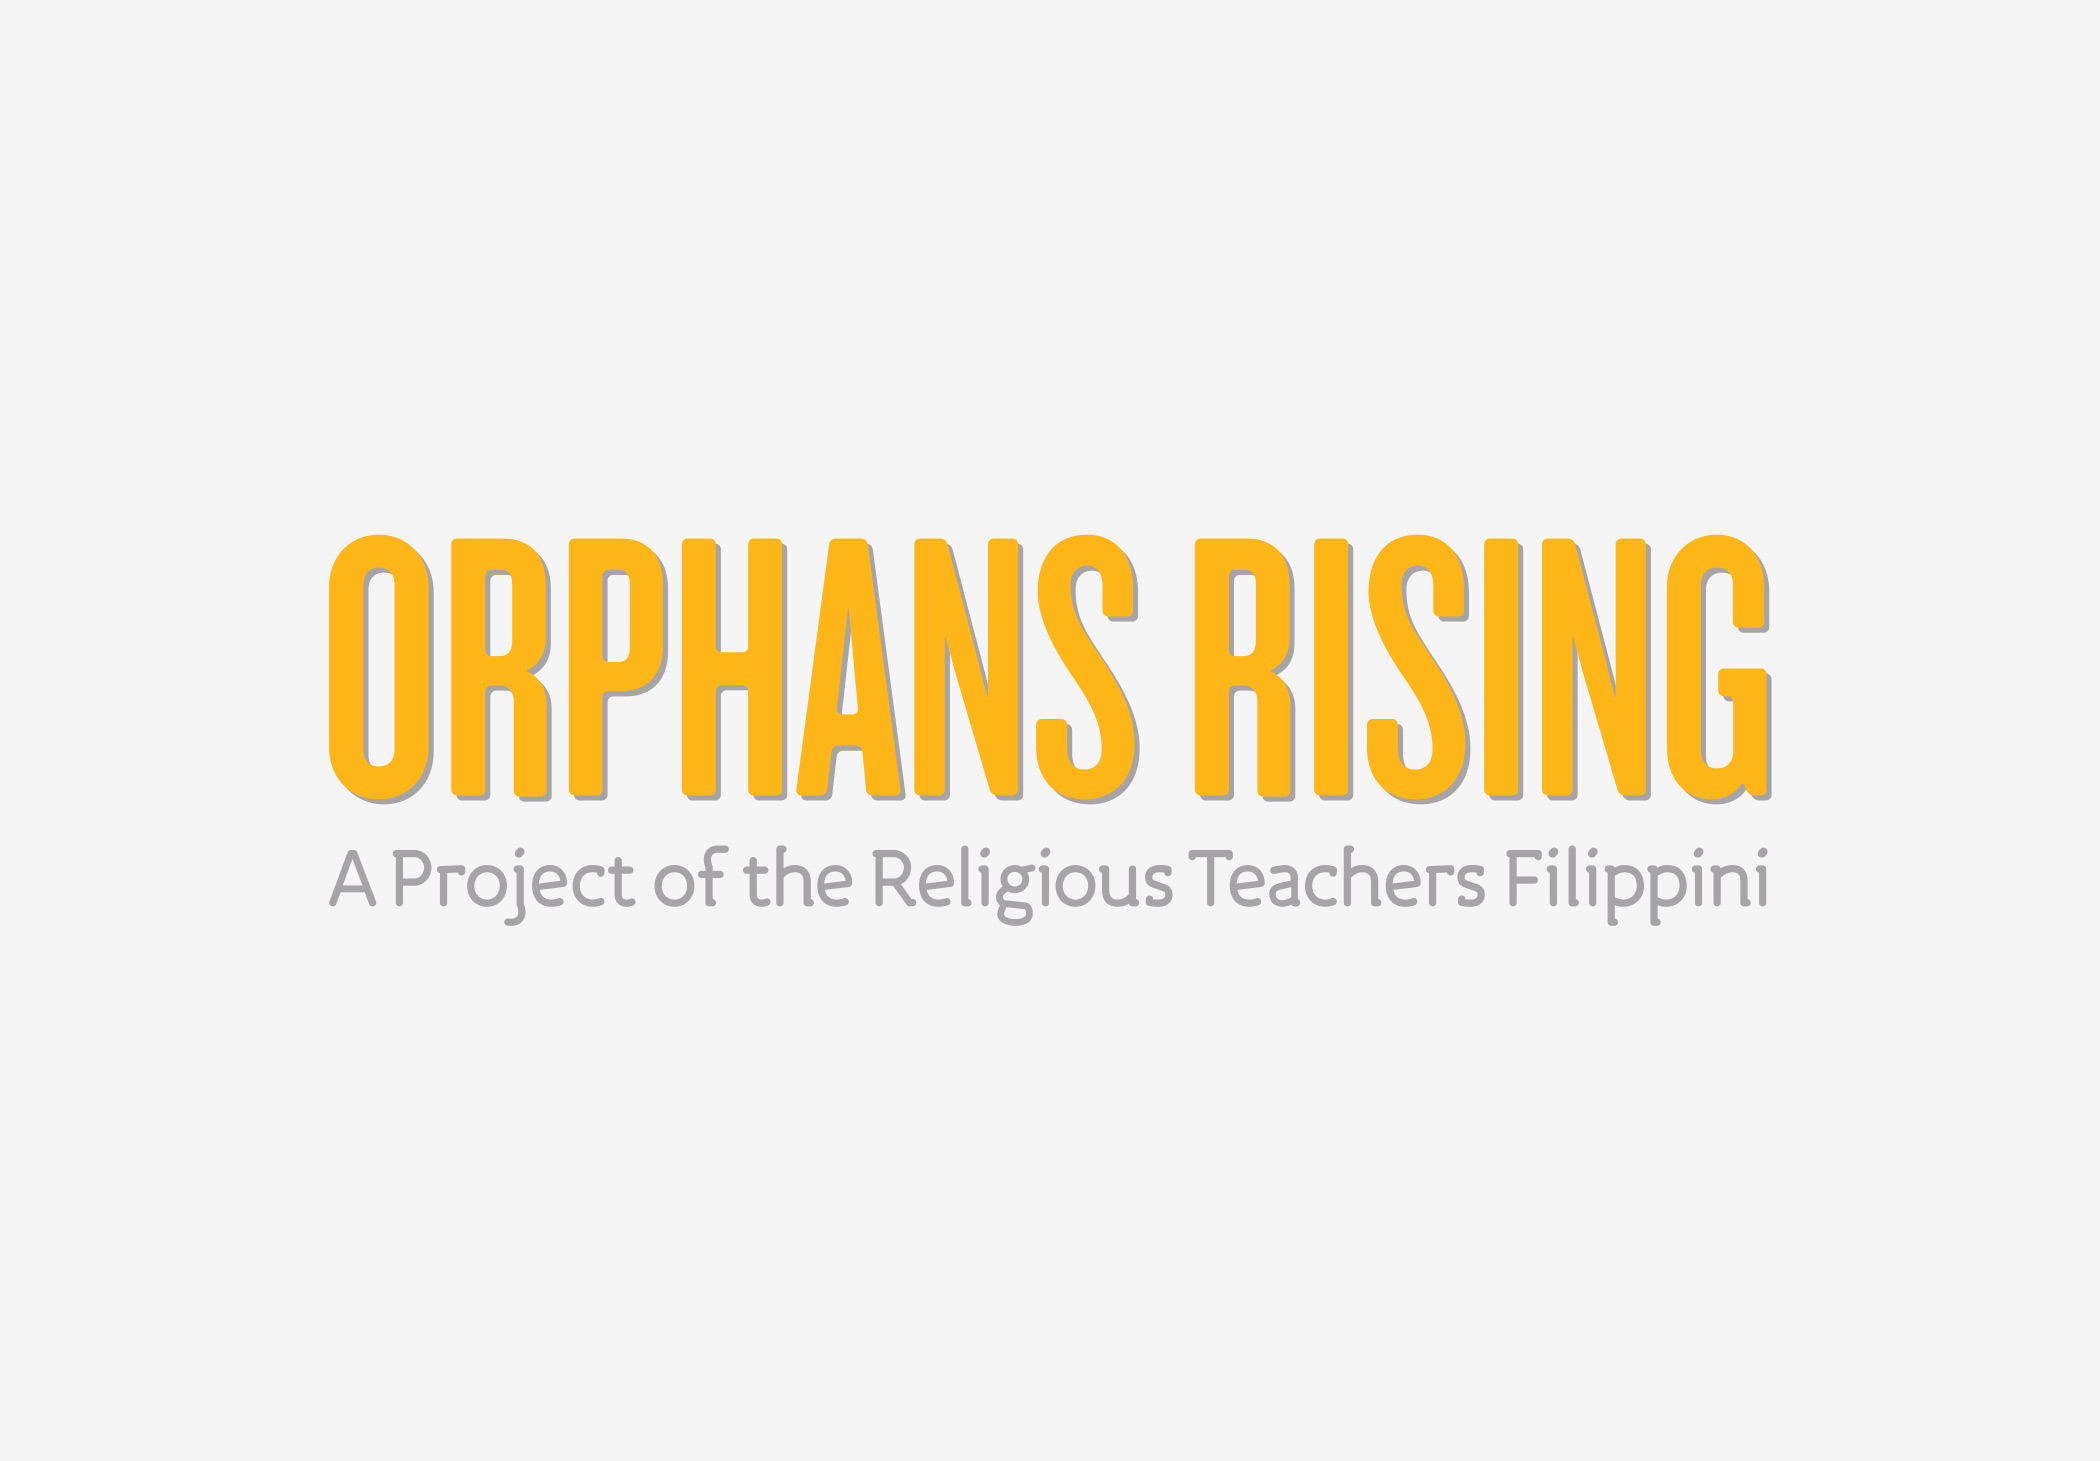 The logotype of Orphans Rising, a project of the Religious Teachers Filippini.